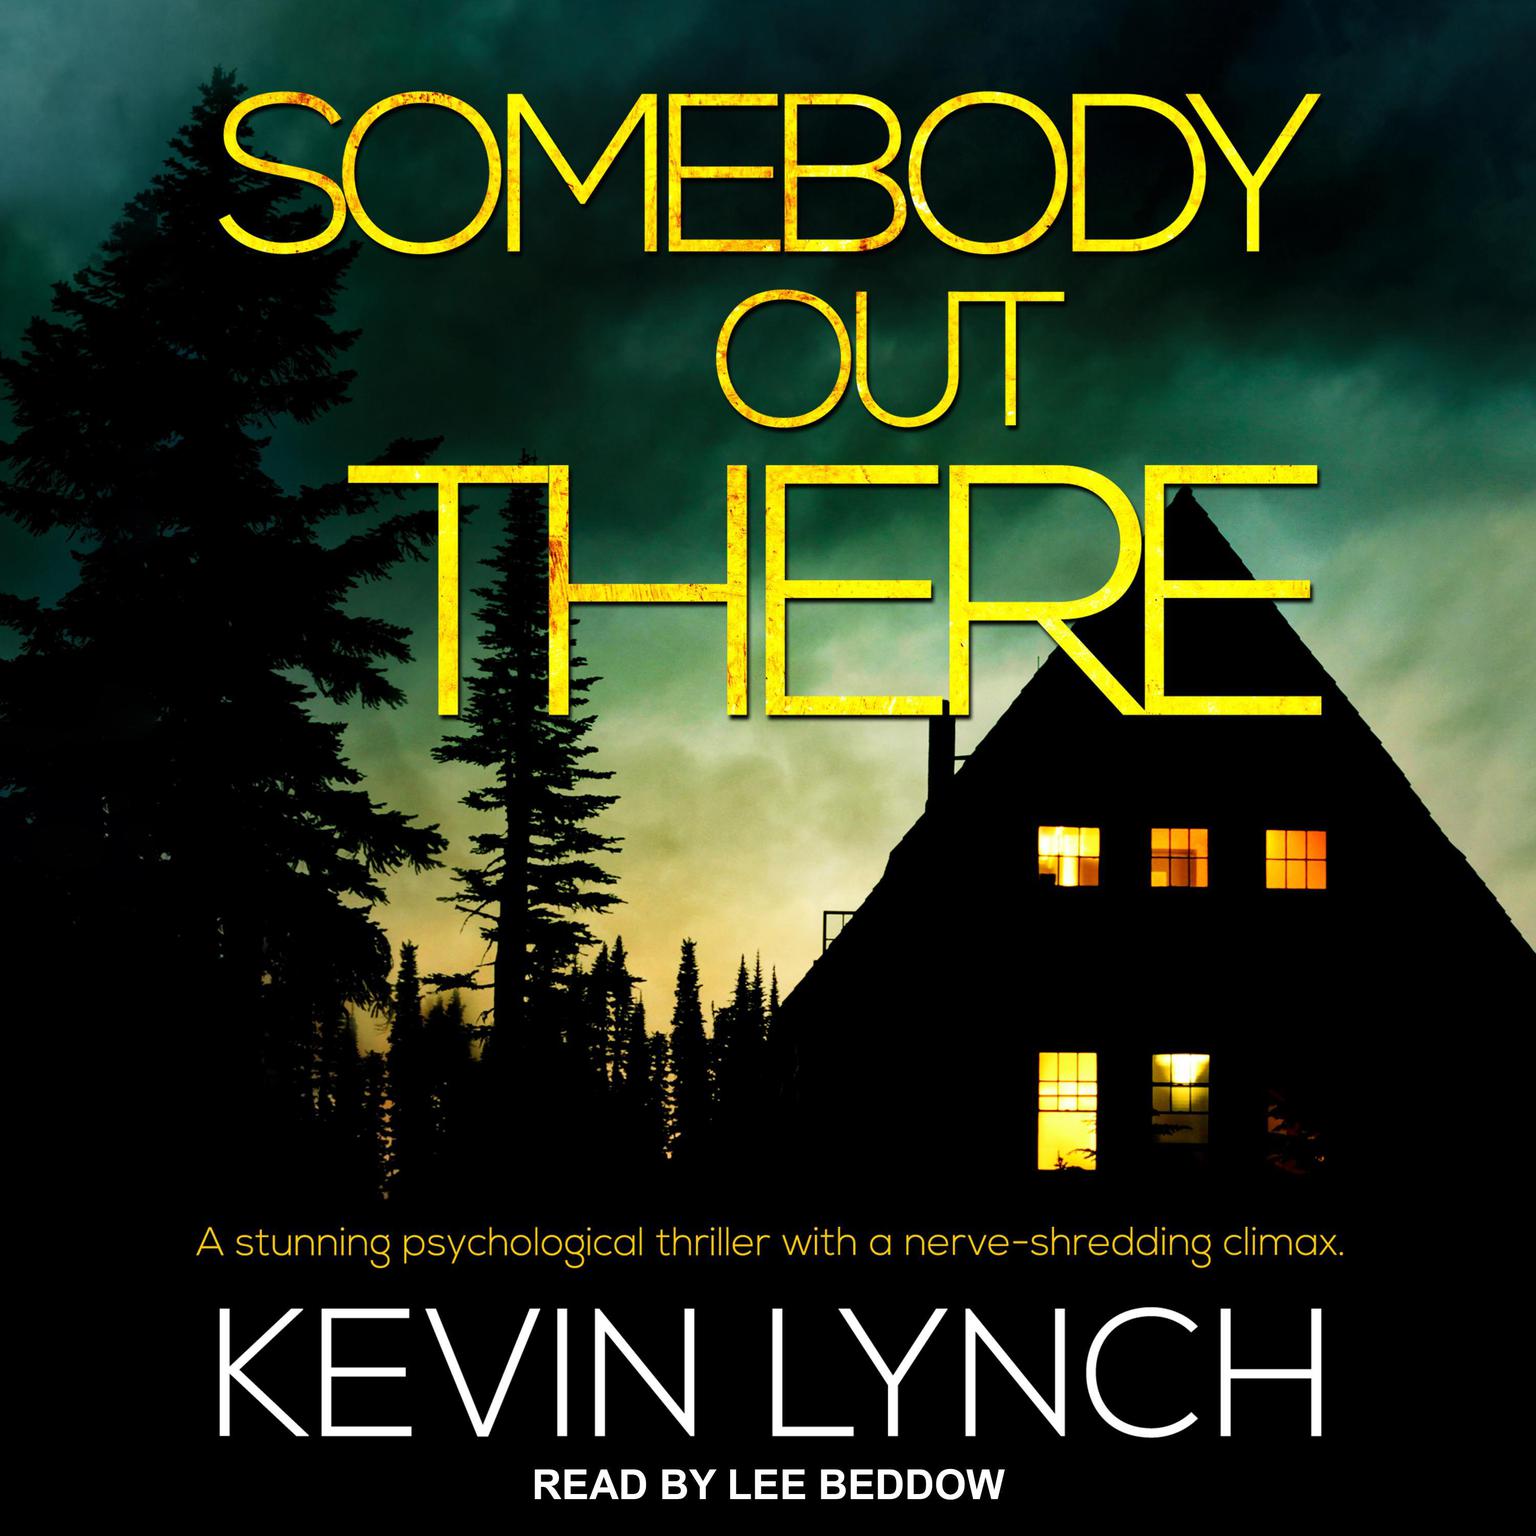 Somebody Out There Audiobook, by Kevin Lynch